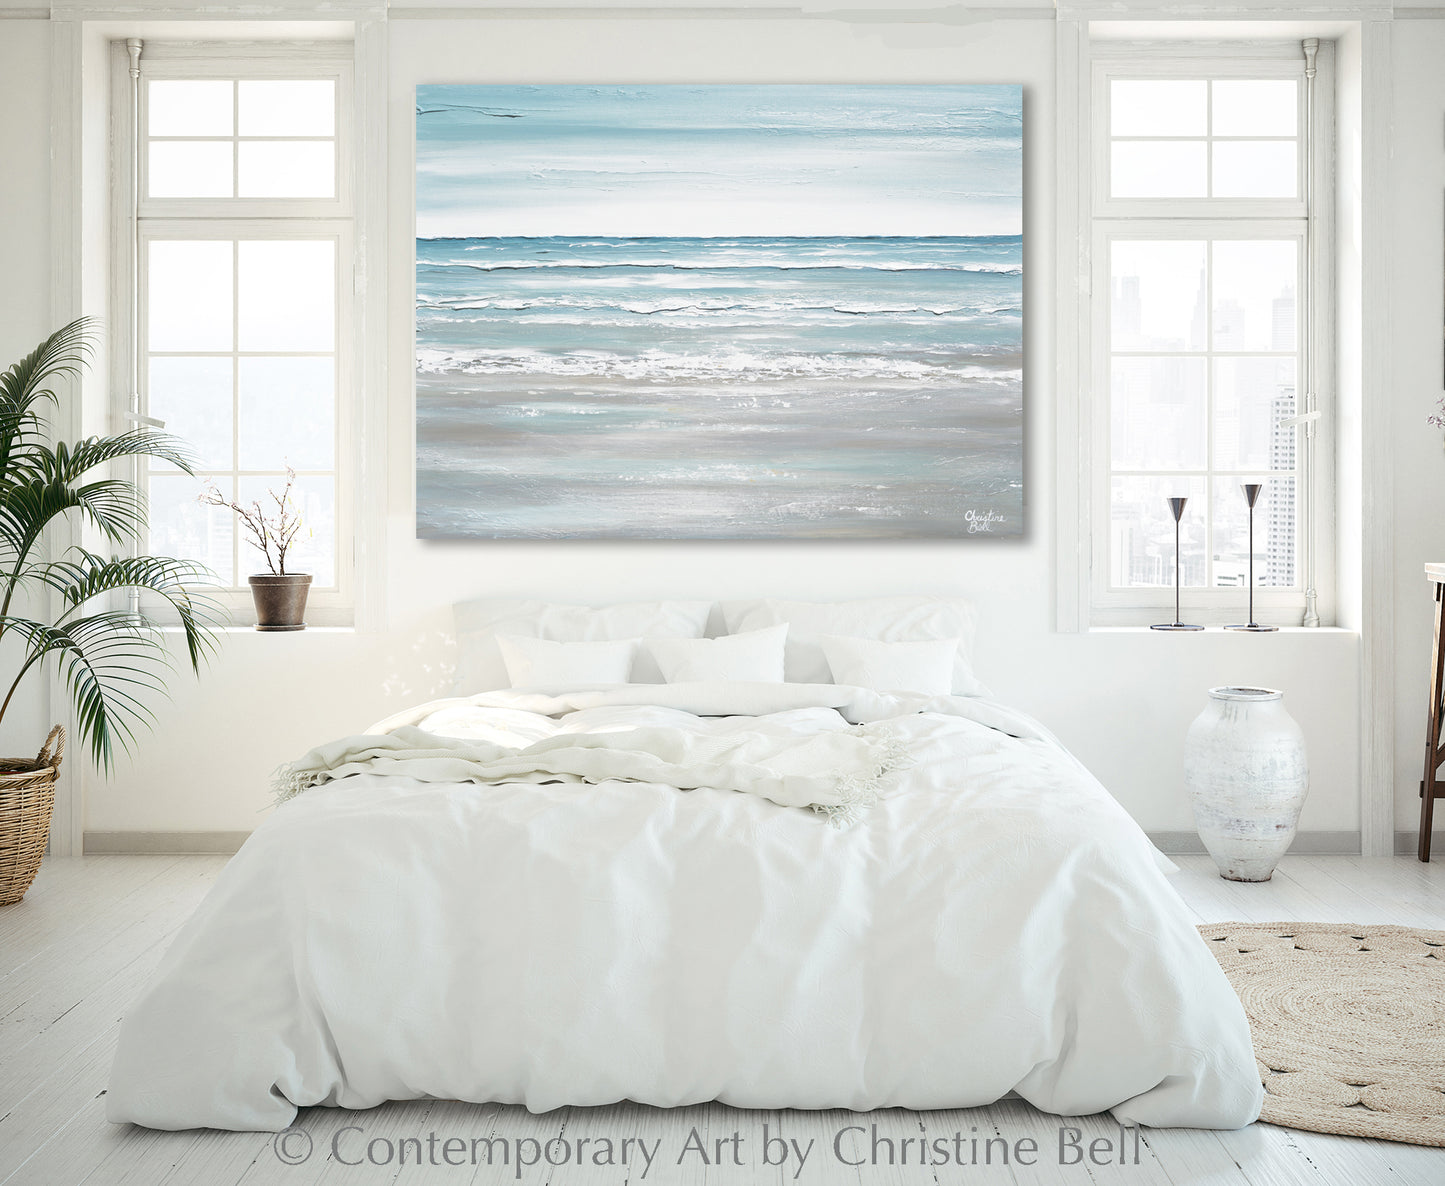 "Staying Afloat" ORIGINAL Textured Seascape Painting 40x30"